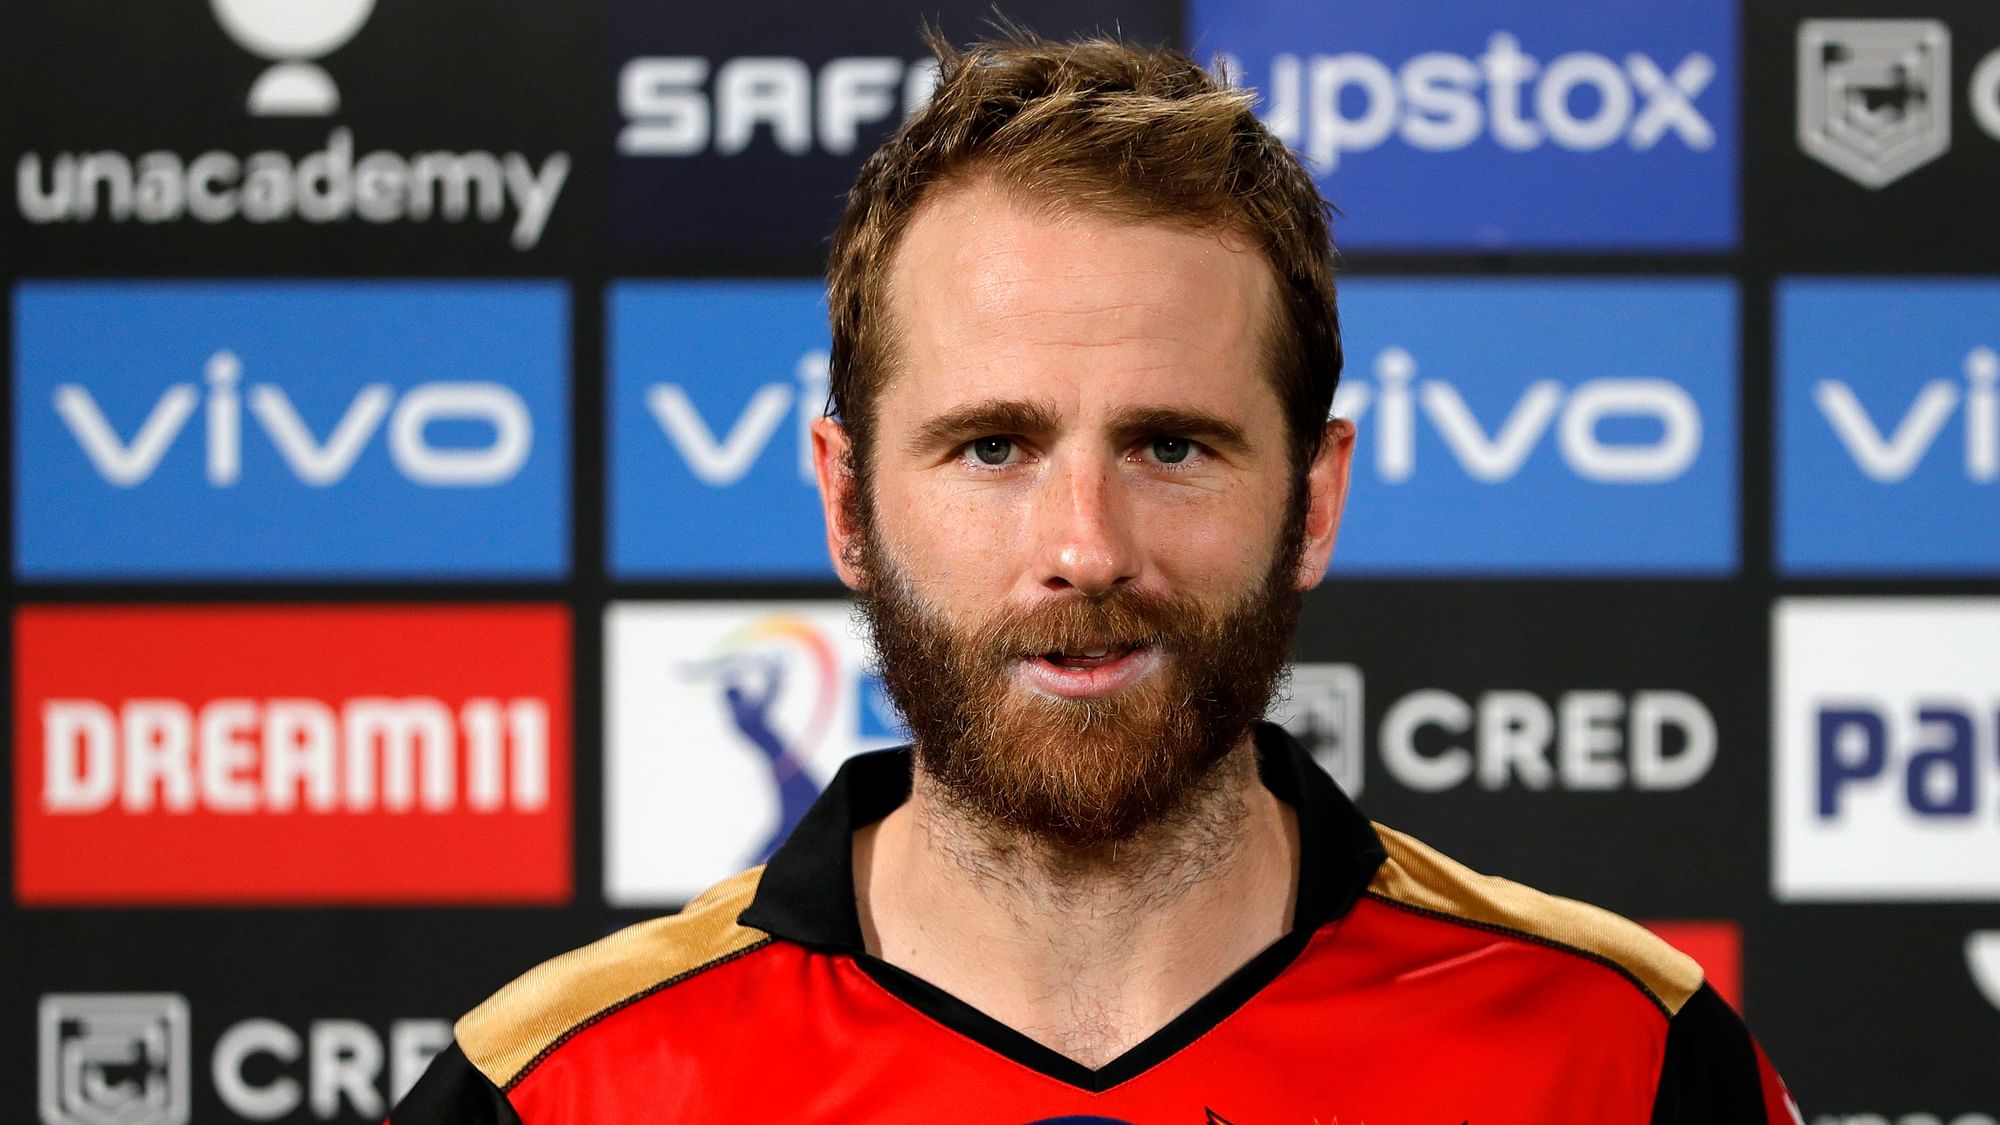 Kane Williamson commented on the change in SRH’s captaincy.